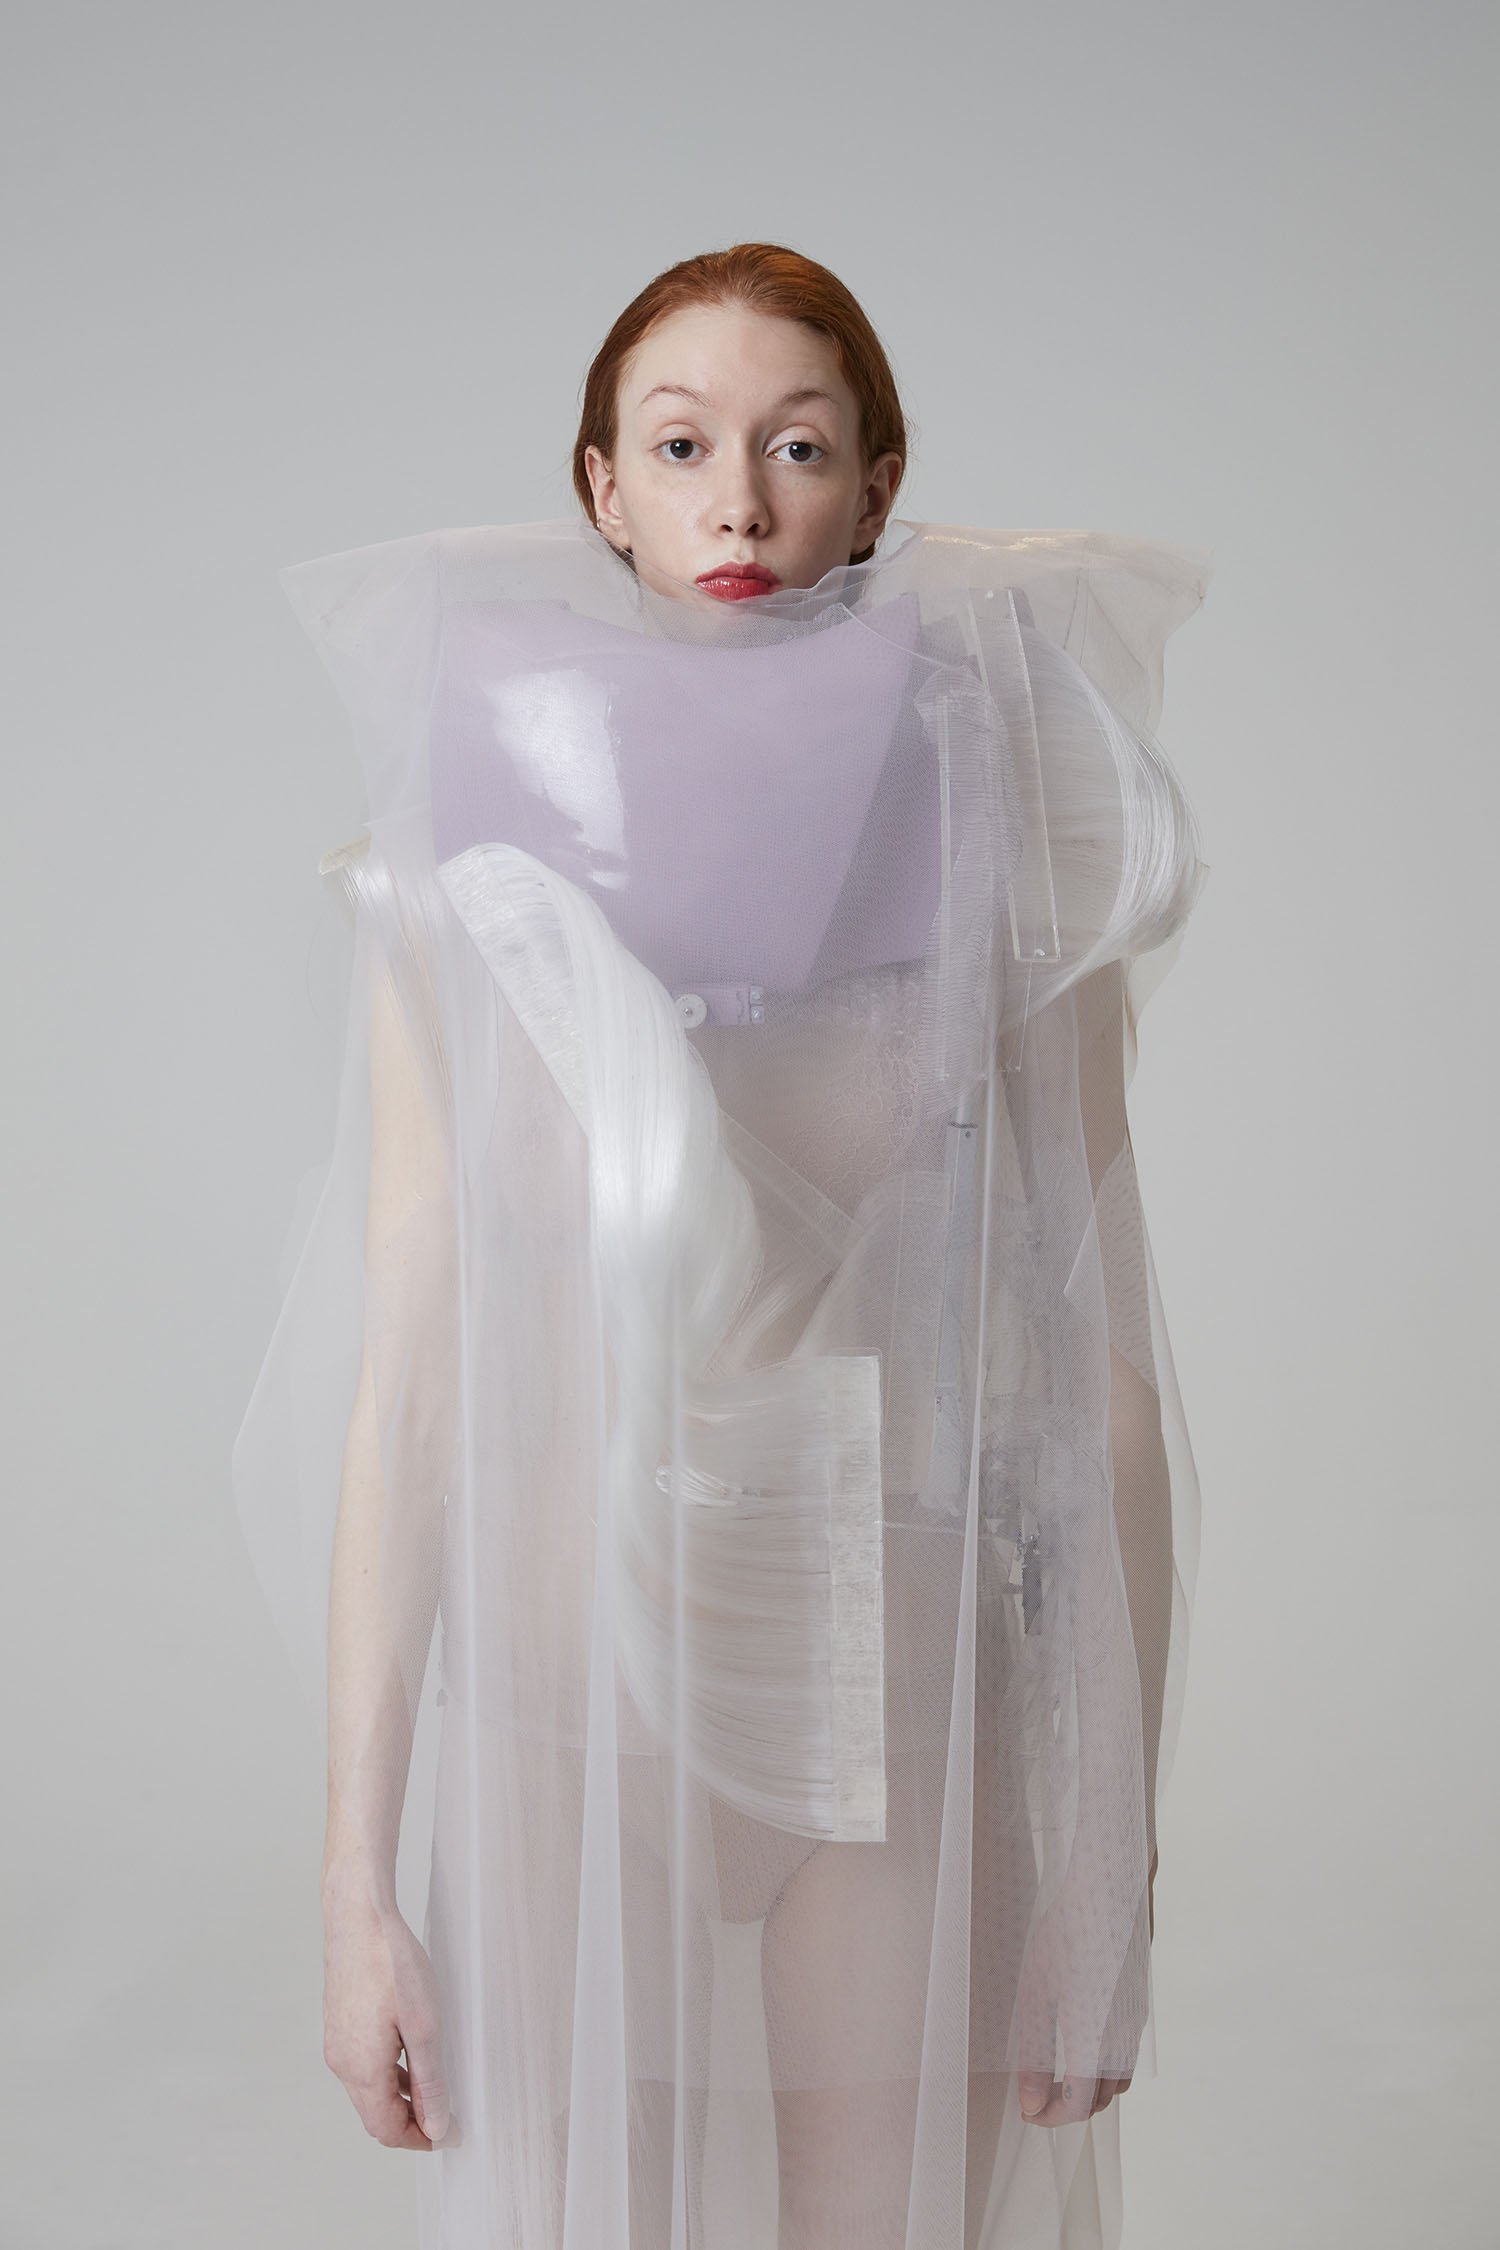 Possible Tomorrows: Ying Gao's Robotised Dresses - IGNANT